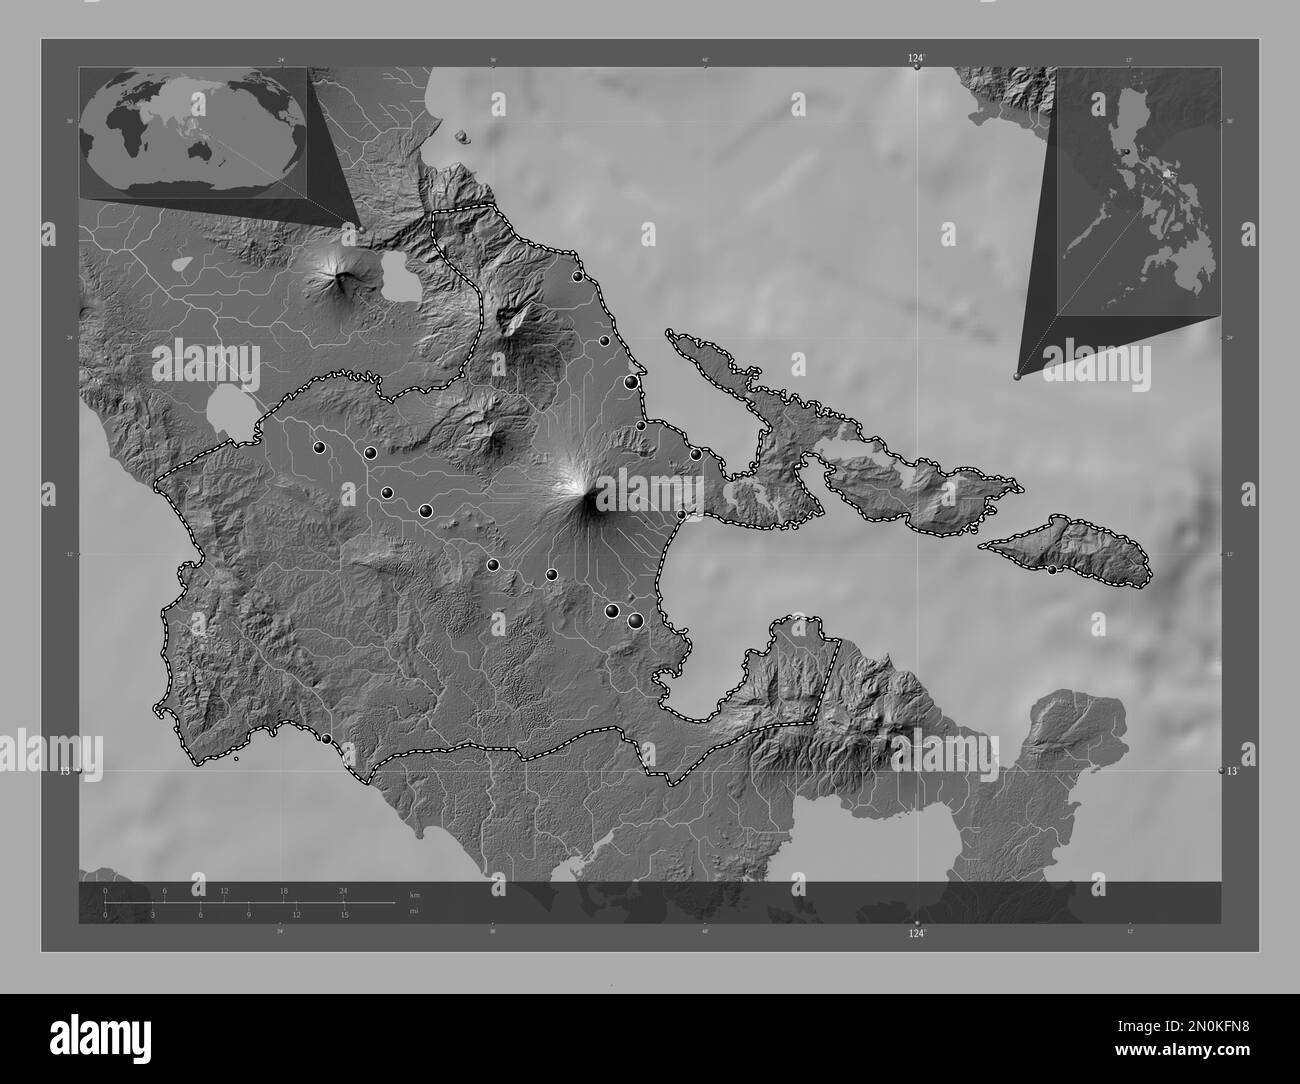 Albay, province of Philippines. Bilevel elevation map with lakes and rivers. Locations of major cities of the region. Corner auxiliary location maps Stock Photo